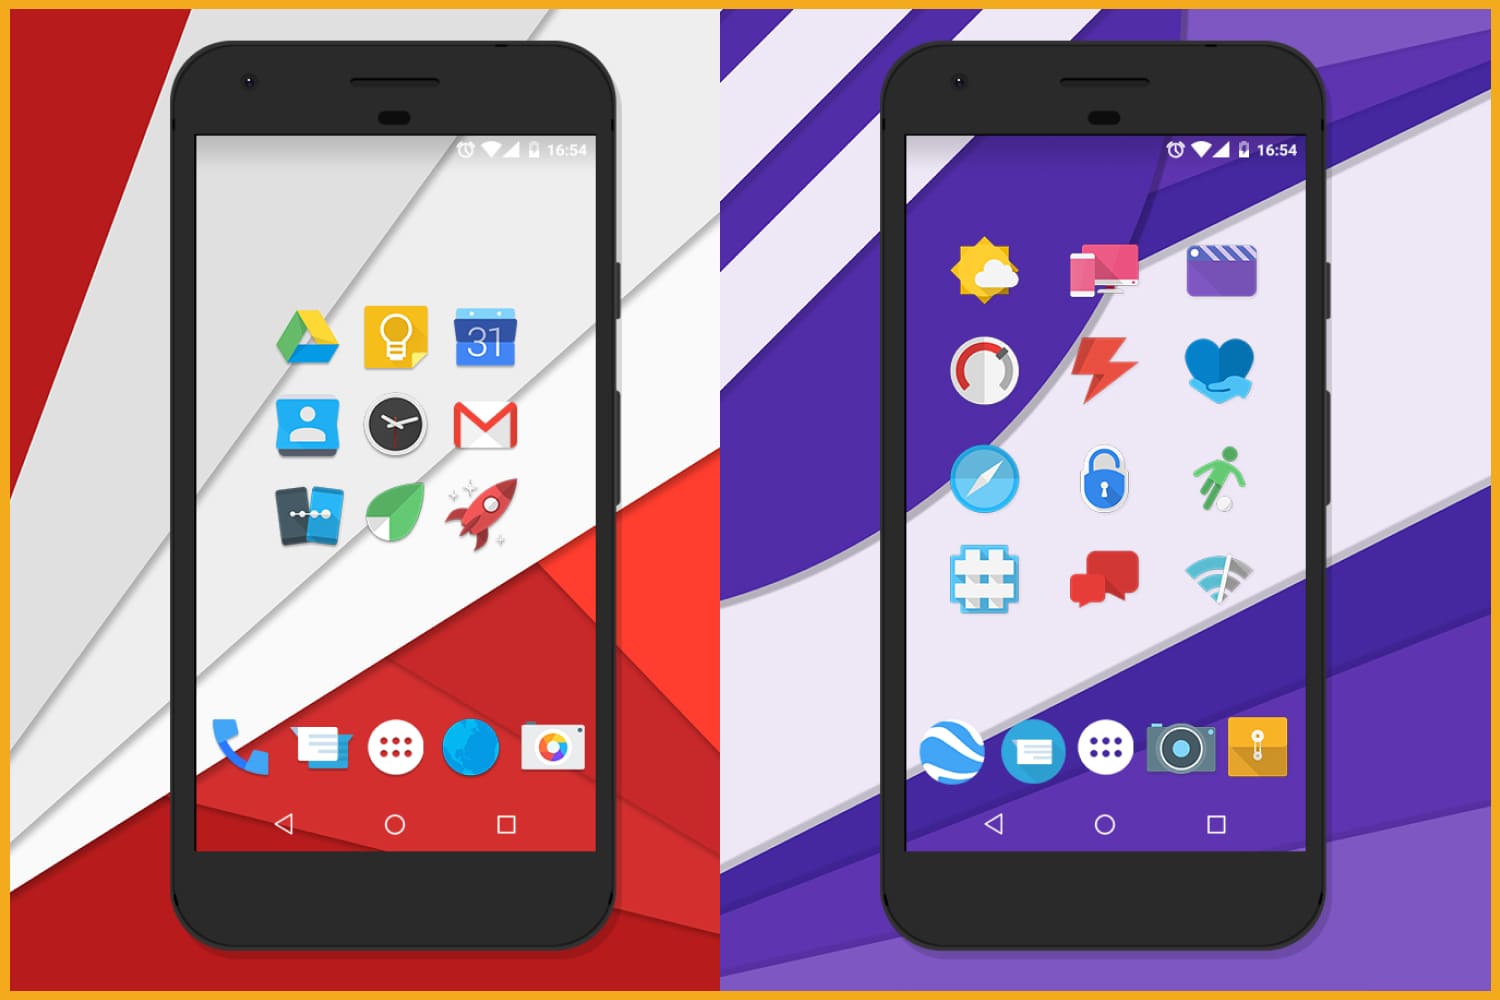 Two smartphones with icons on their screens.